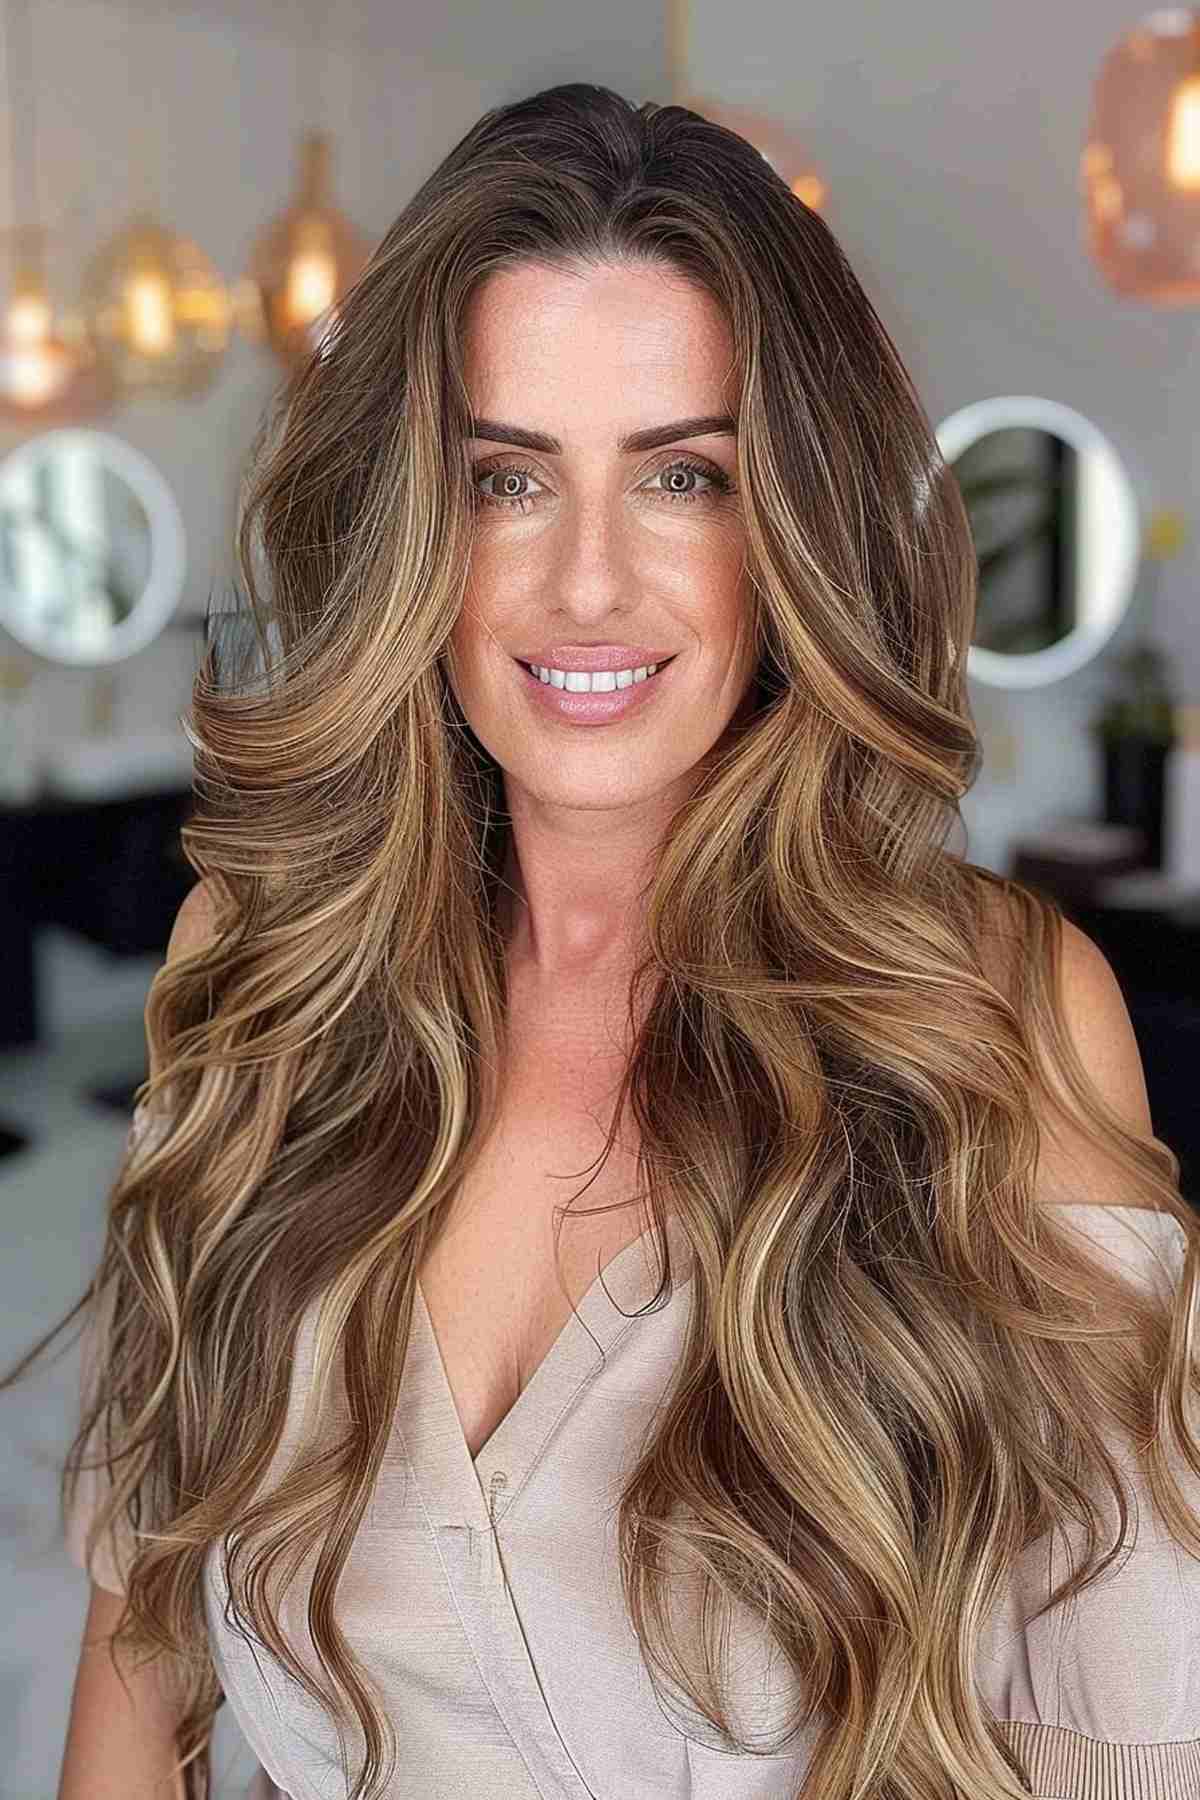 Trendy long hair with balayage for women over 30, featuring dark roots and sun-kissed ends